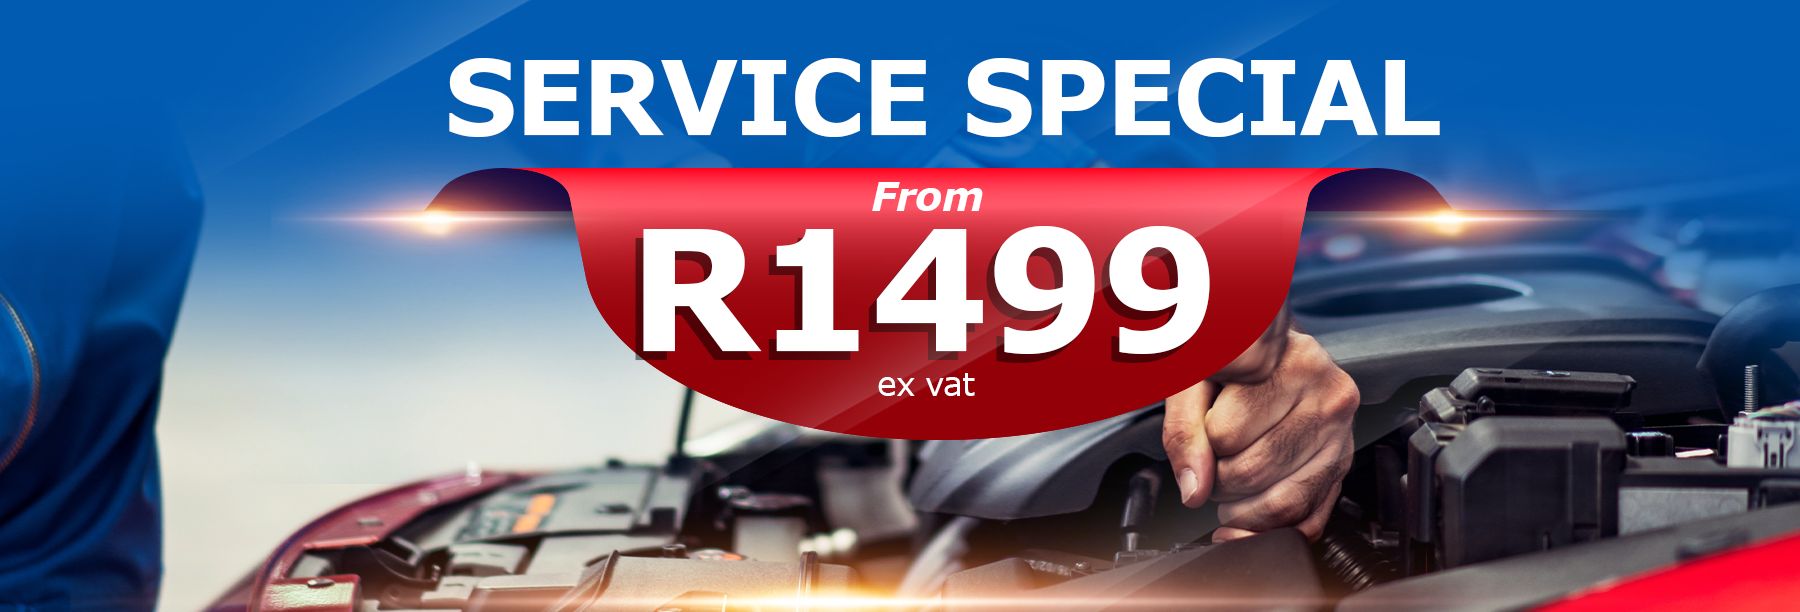 Service Special from R1499